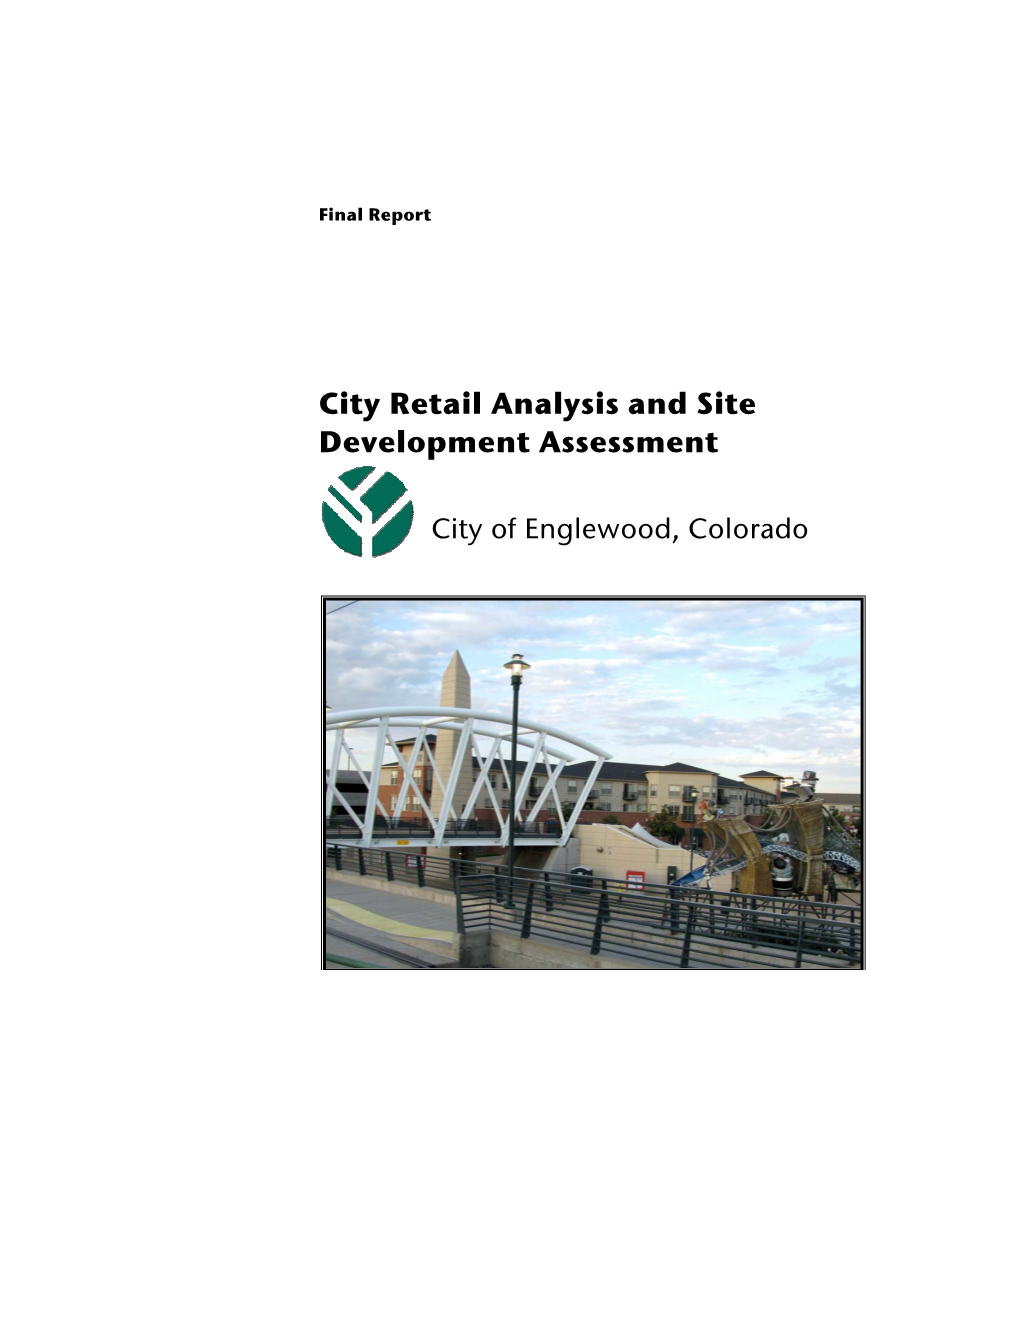 City Retail Analysis and Site Development Assessment